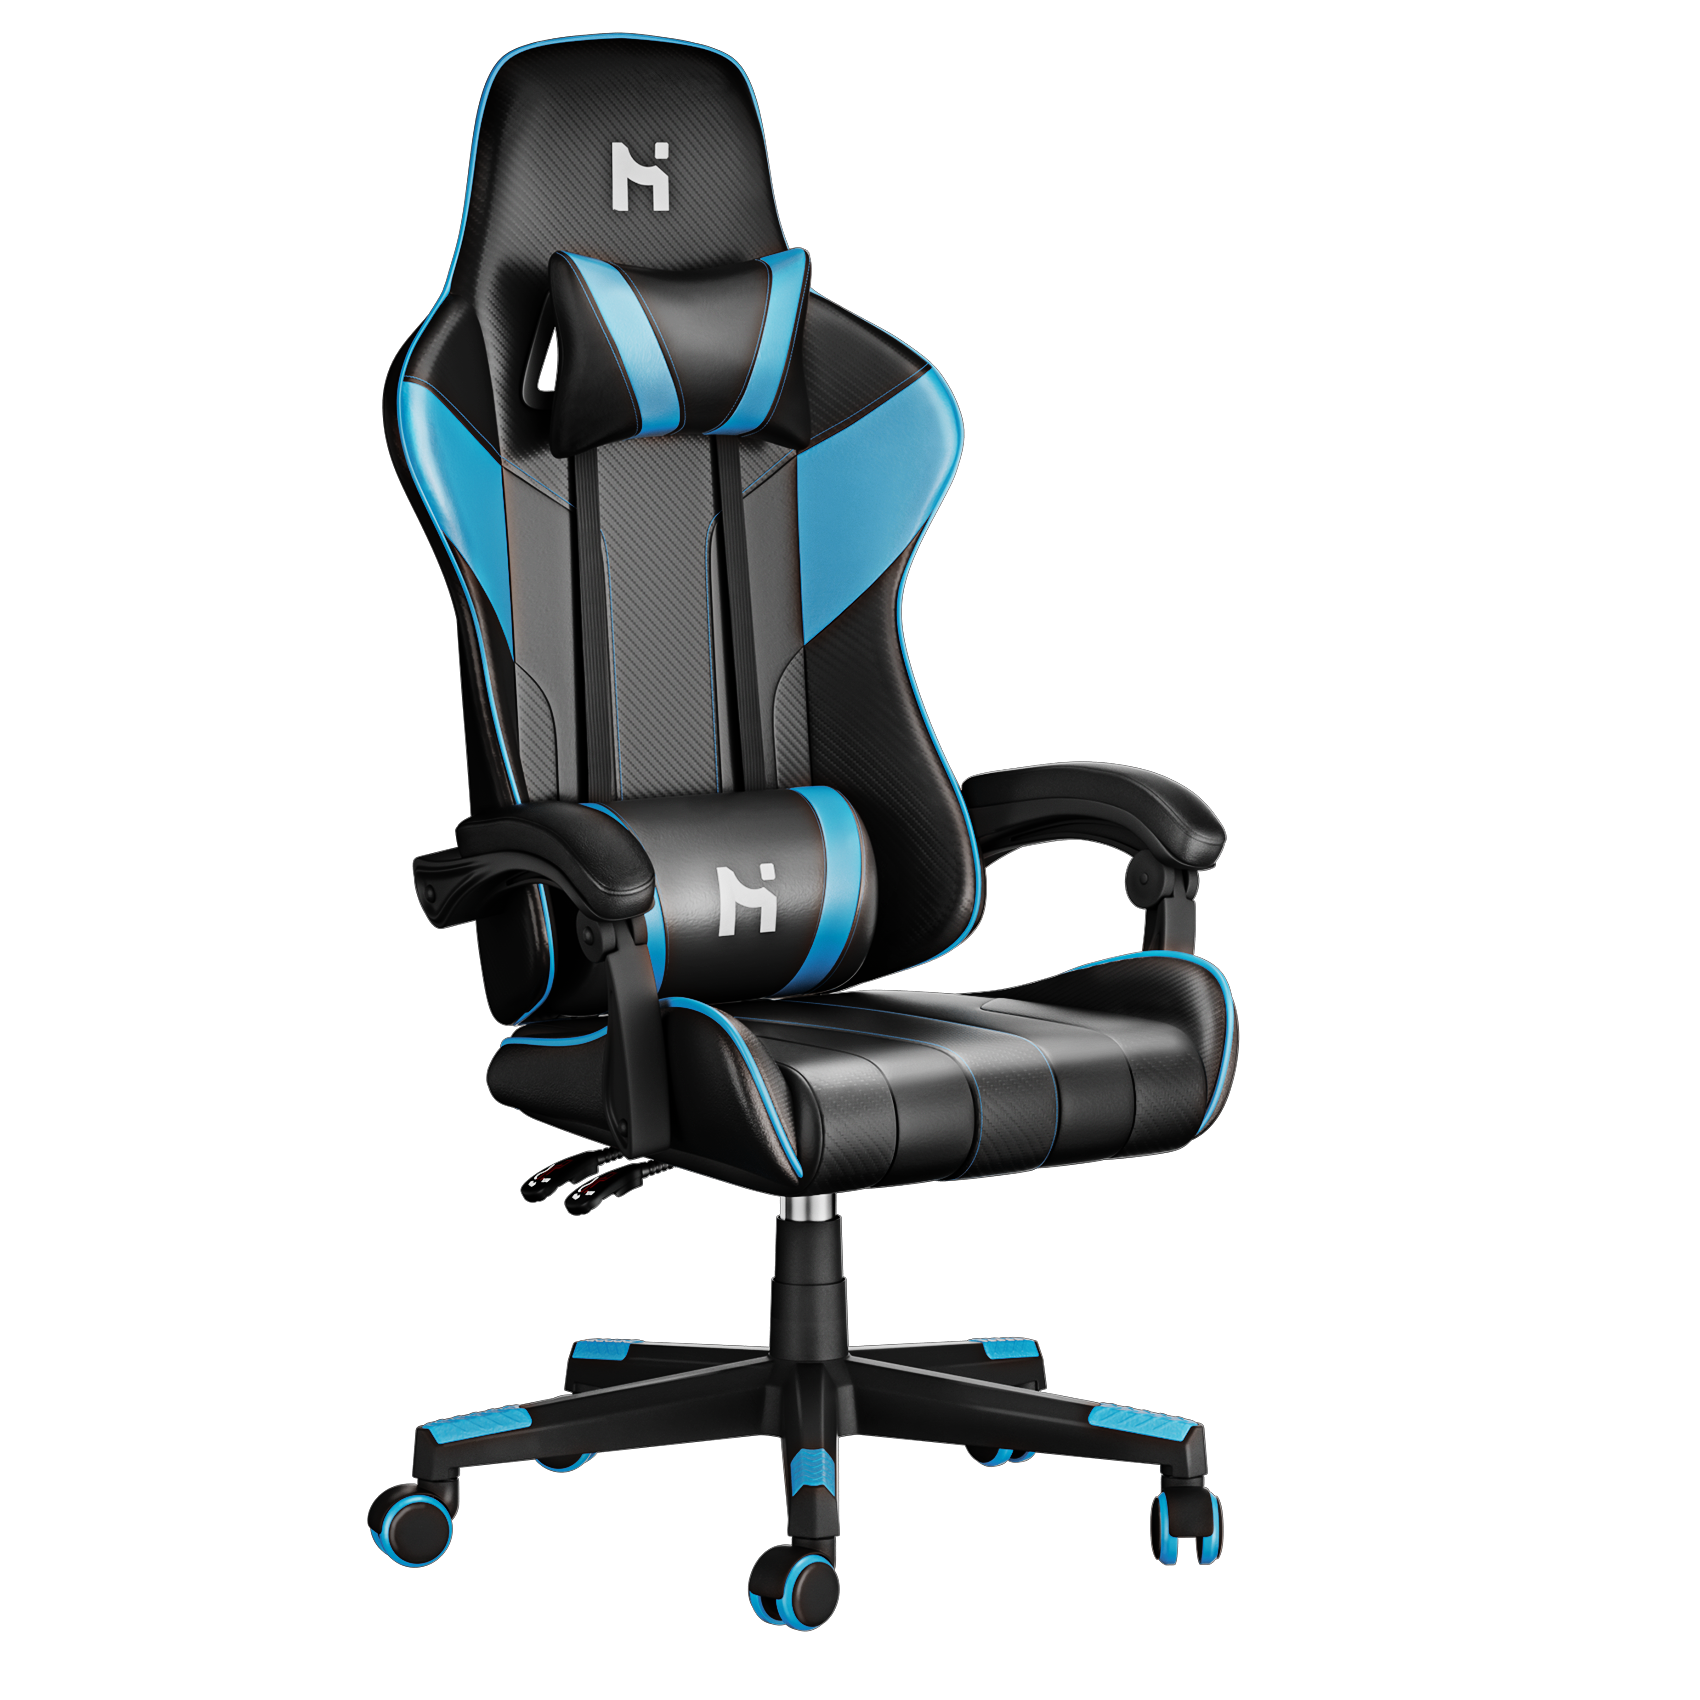 HLONONE Chaise Gaming, Ergonomique Fauteuil Gaming, Chaise Gamer